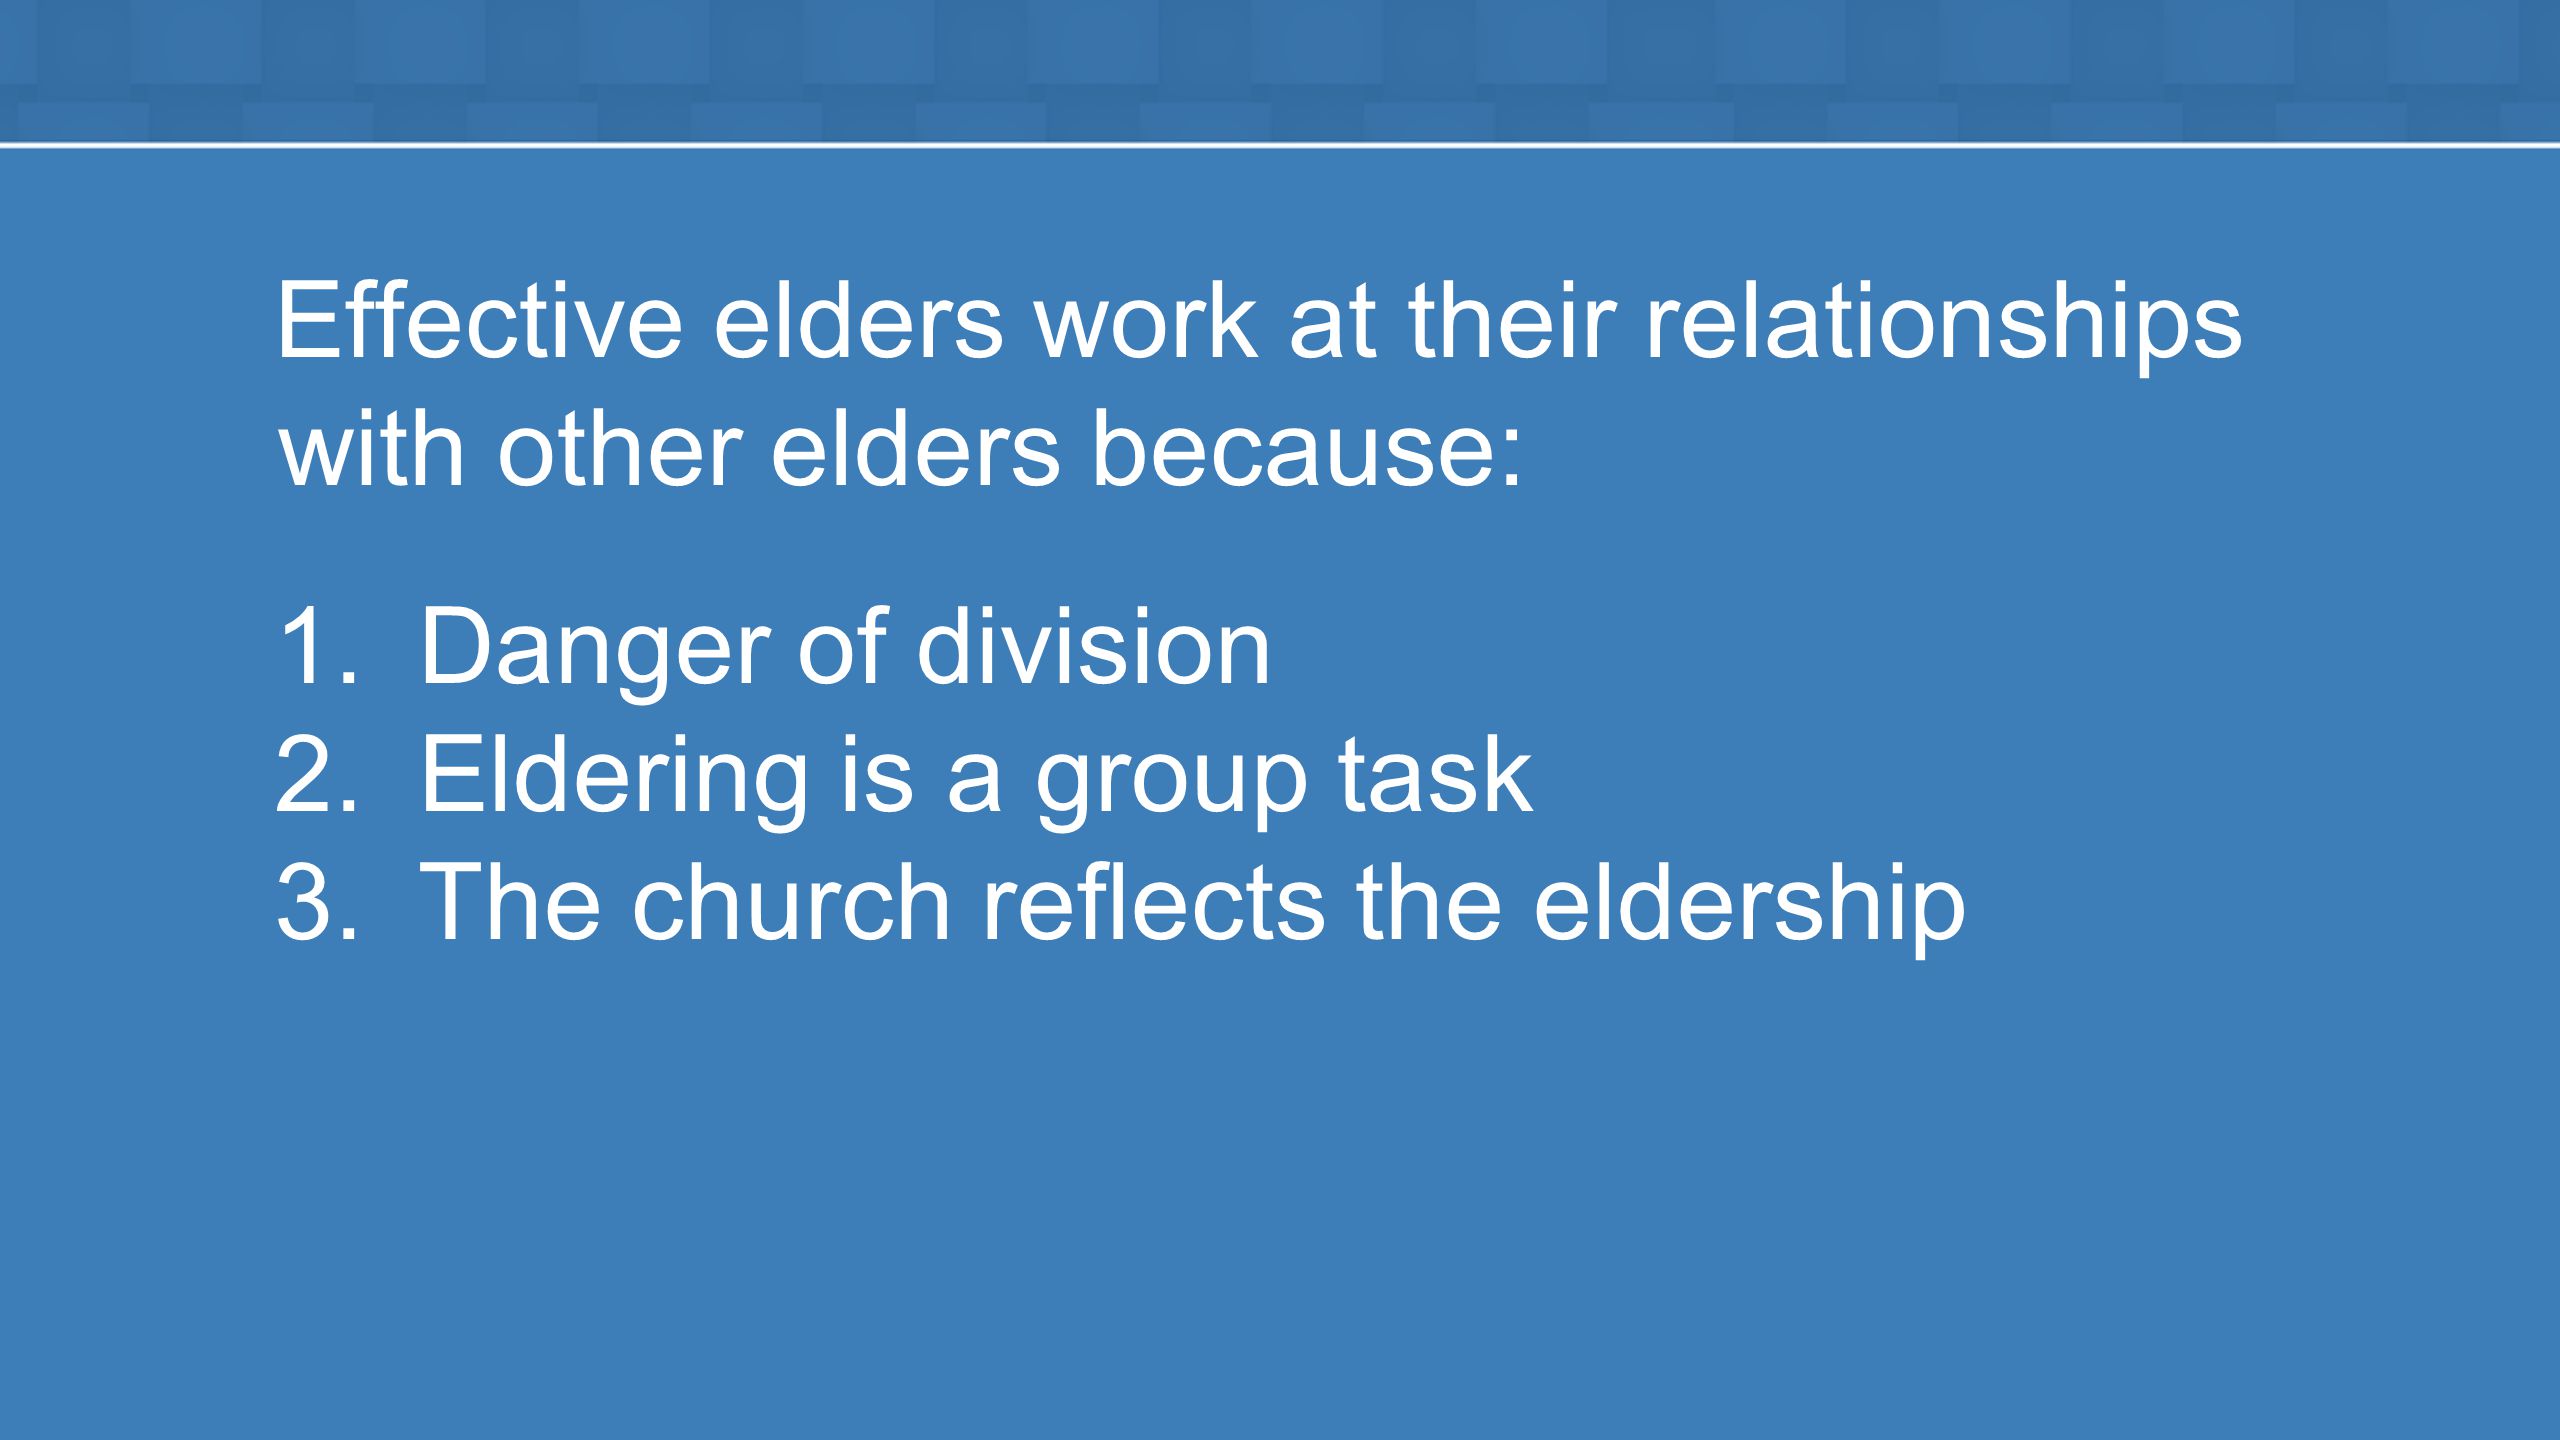 Effective elders work at their relationships with other elders because: 1.Danger of division 2.Eldering is a group task 3.The church reflects the eldership